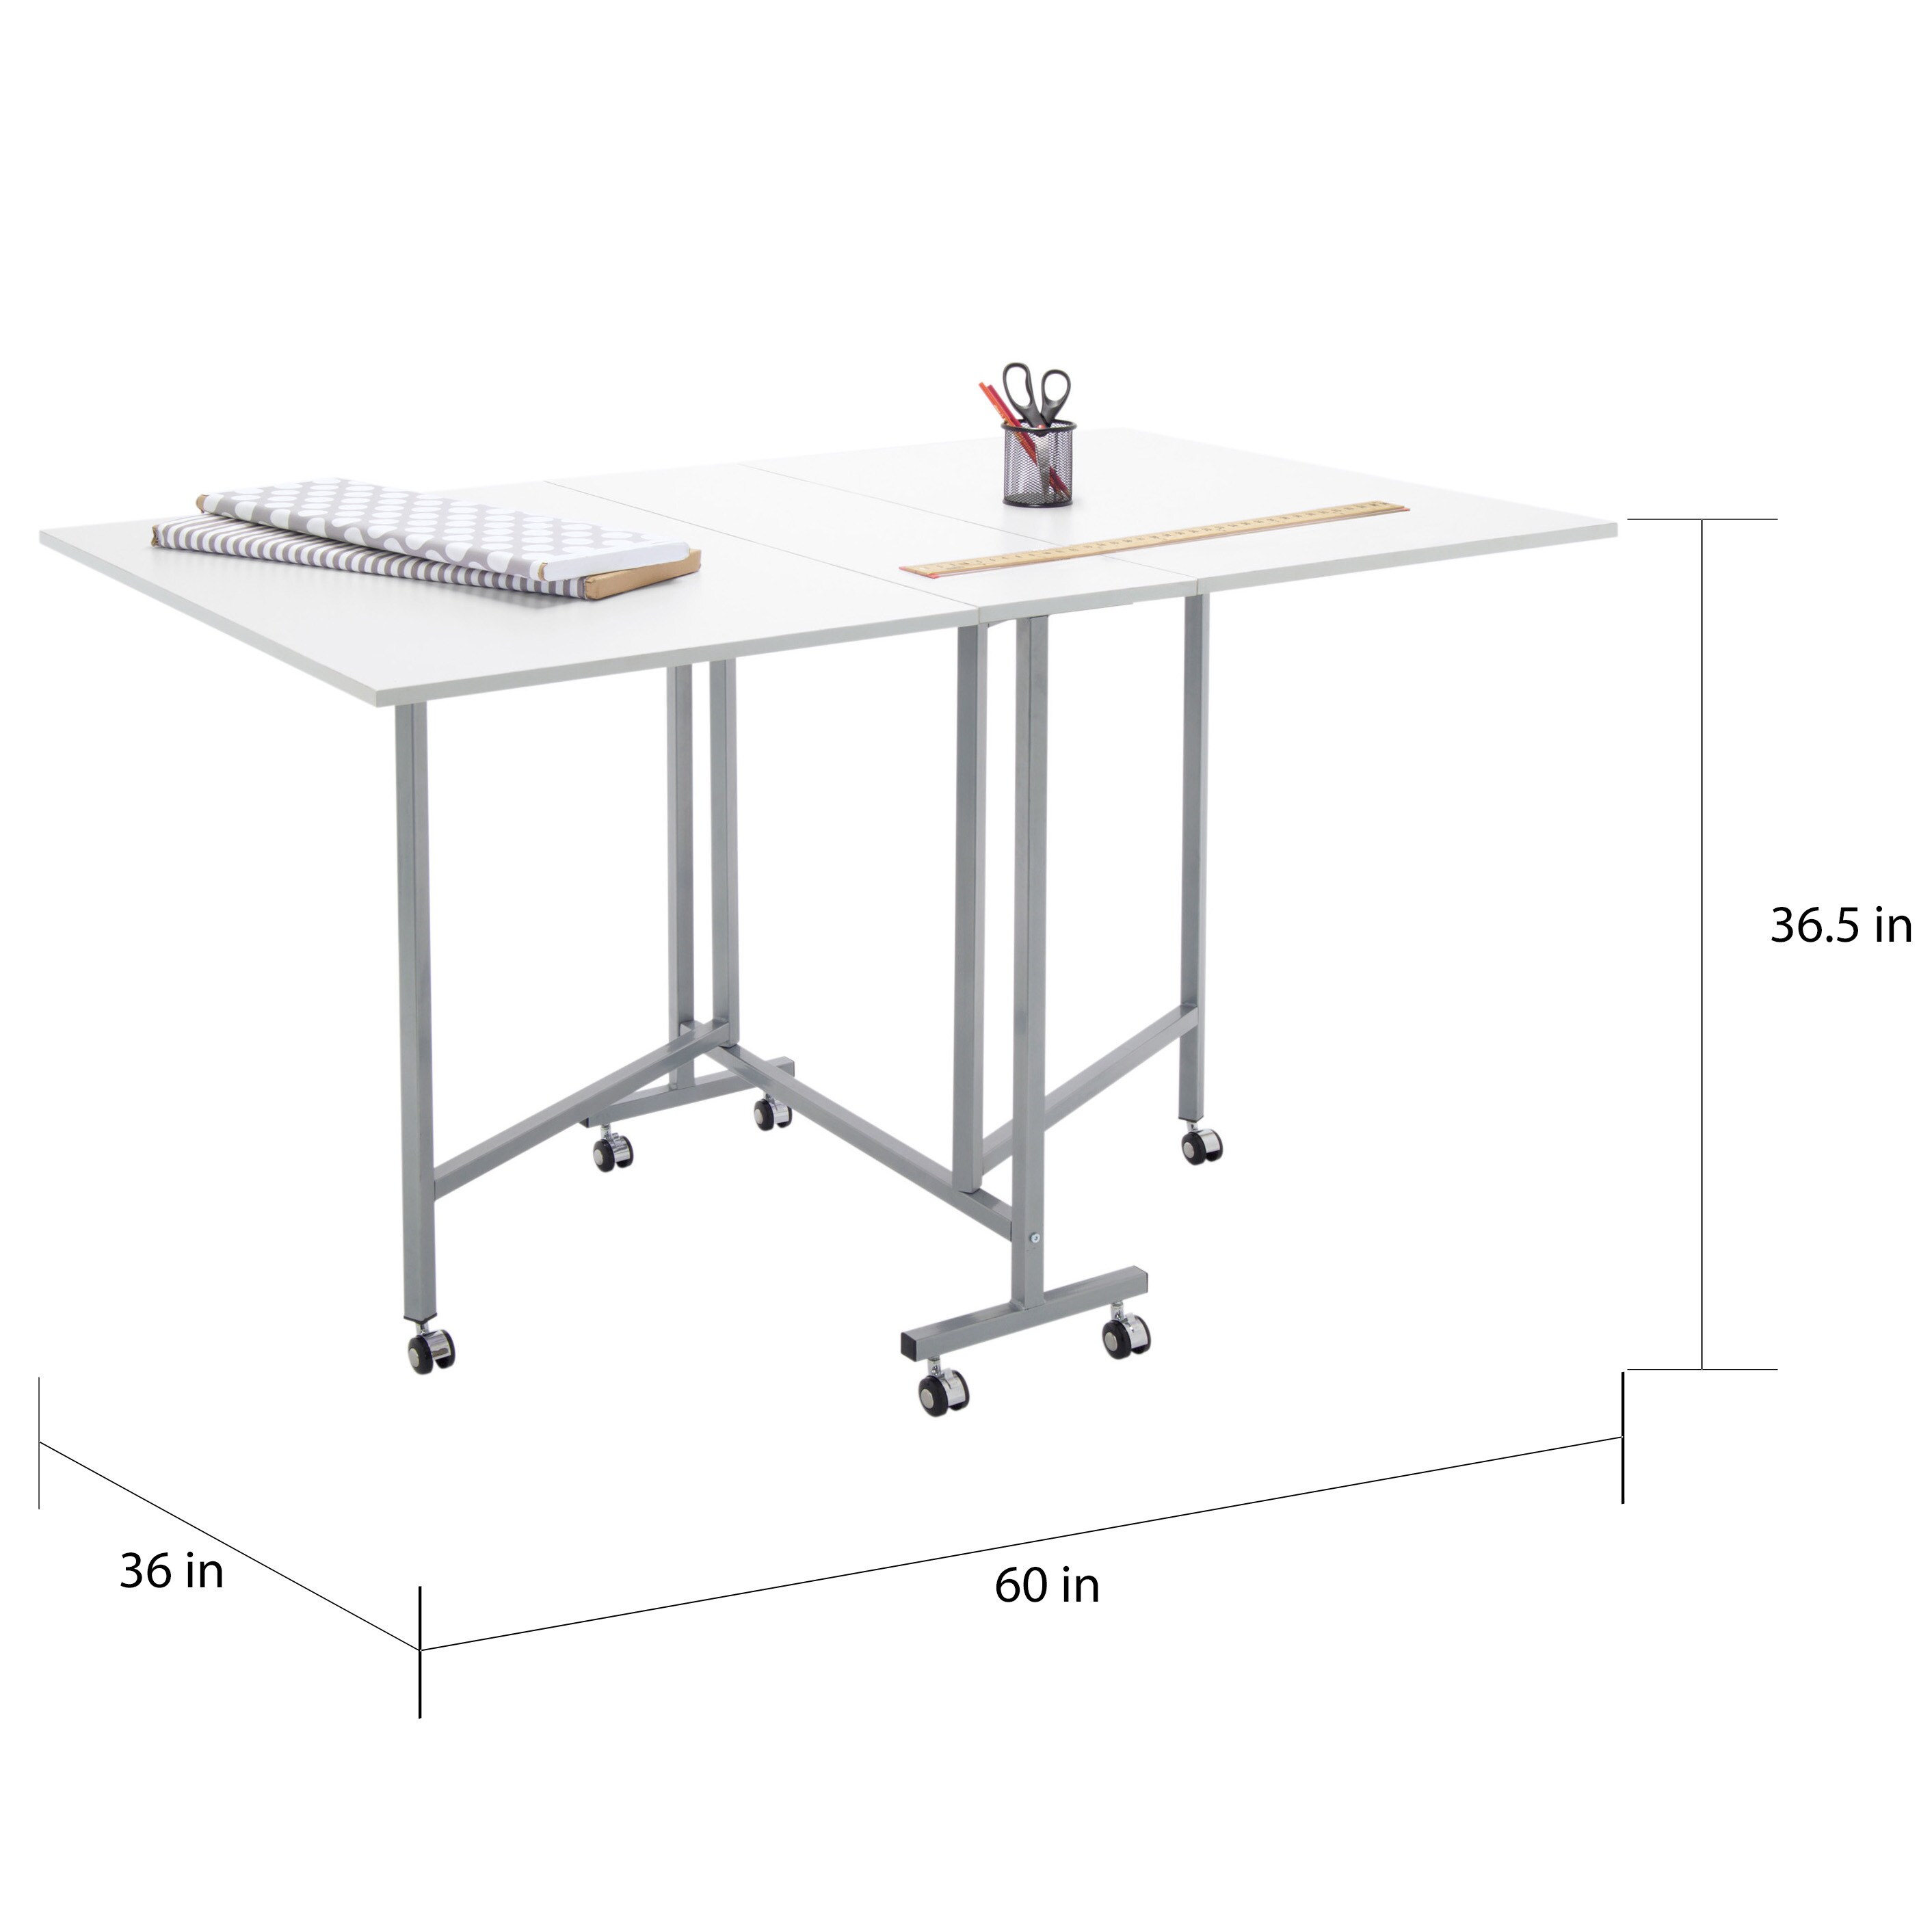 MISC White Powder-Coated Craft and Cutting Sewing Machine Table Laminate Foldable